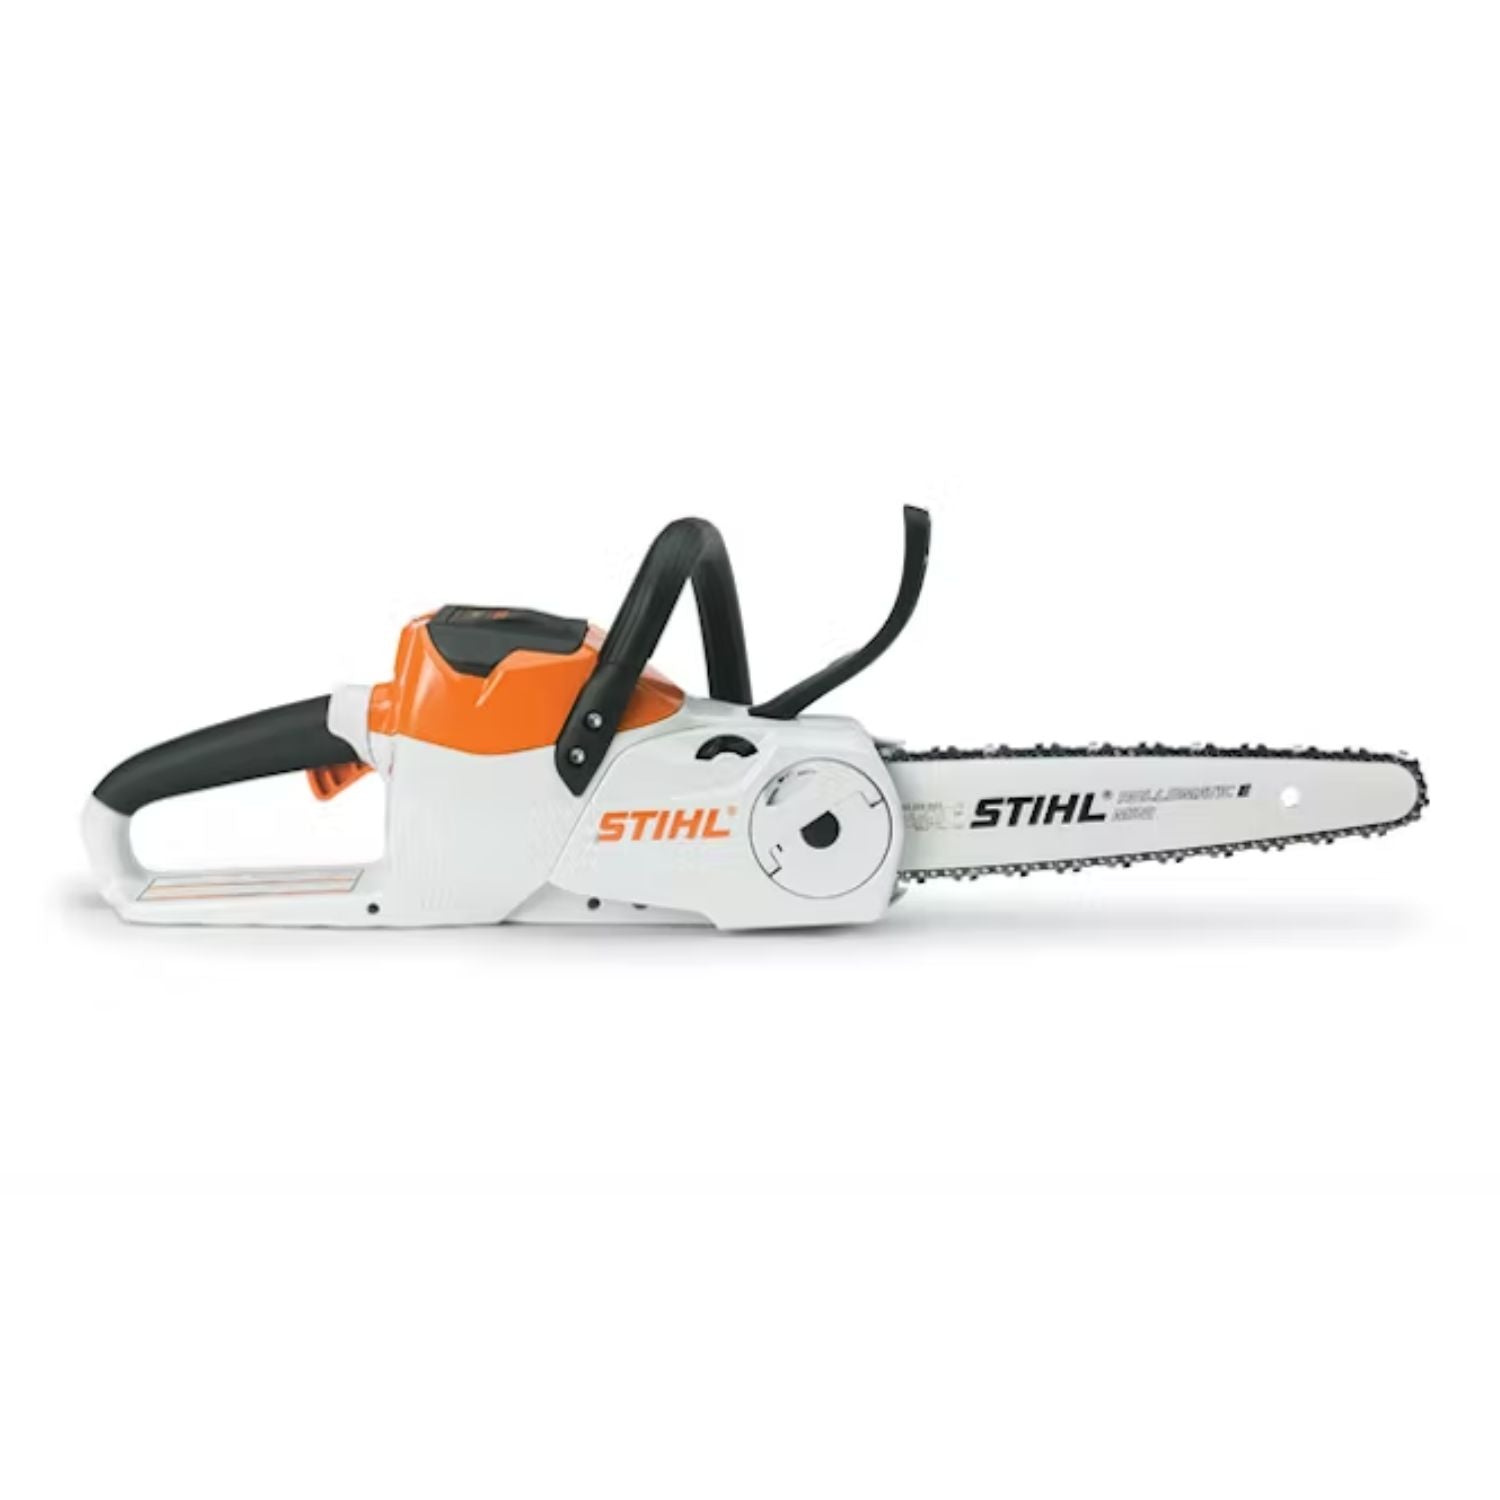 STIHL MSA 120 C-BQ Battery Powered Chainsaw with Battery & Charger